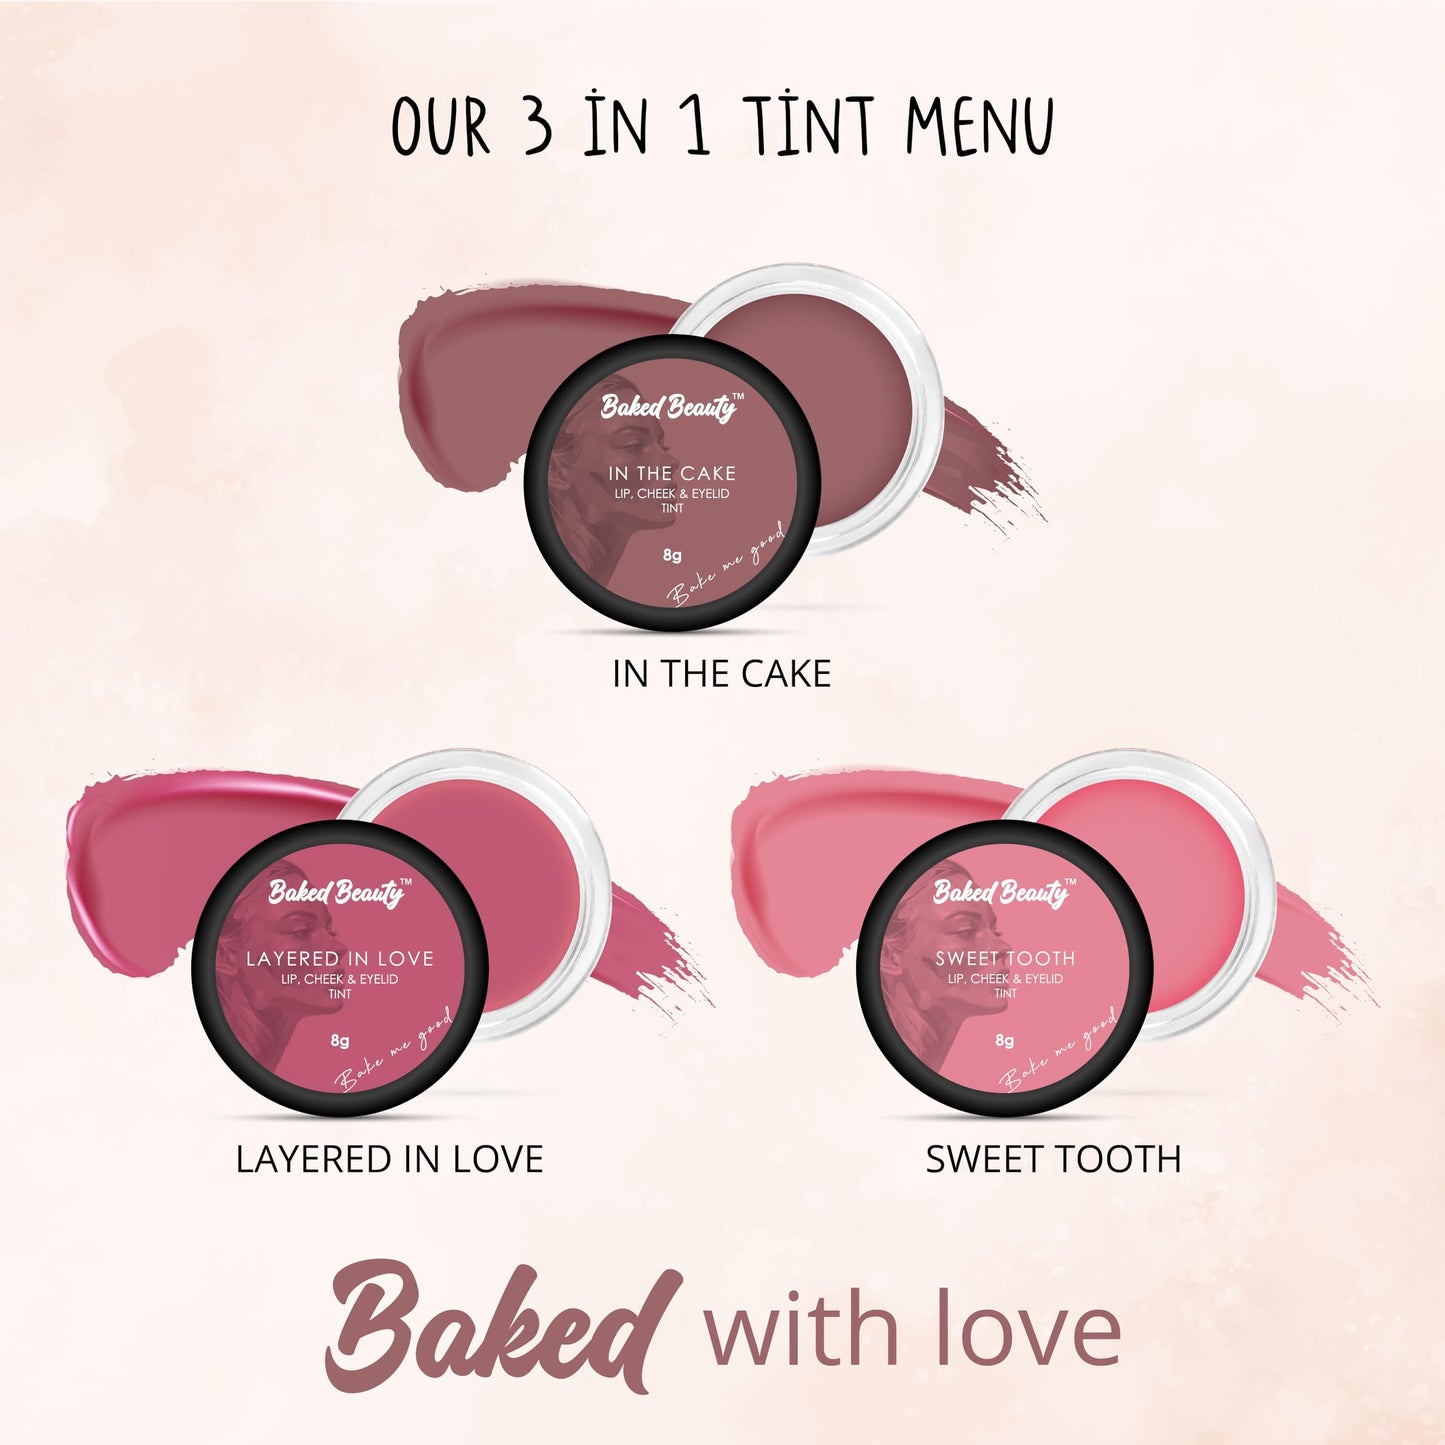 Baked Beauty In The Cake Tint Lip and Cheek Tint (8g) | Eyelid Tint for Girls | With Richness of Vitamin E & Shea Butter | Mousse Concept & Velvet Feel | Creamy Lightweight & Easily Merge with Lips & Skin